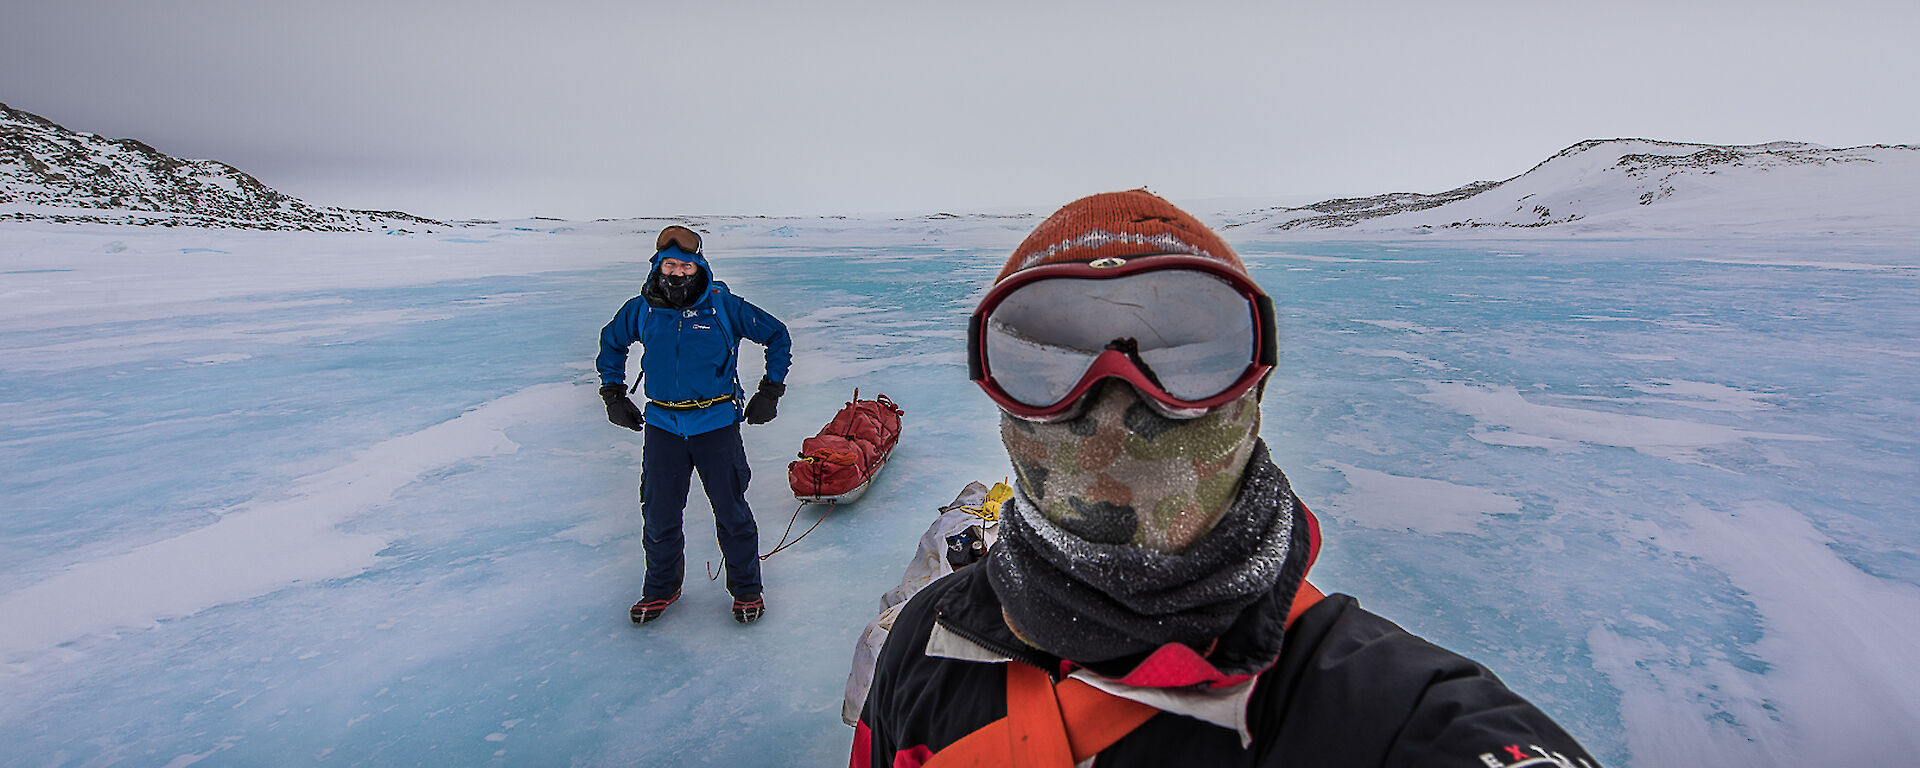 Mark and Stu on the sea ice with sleds.